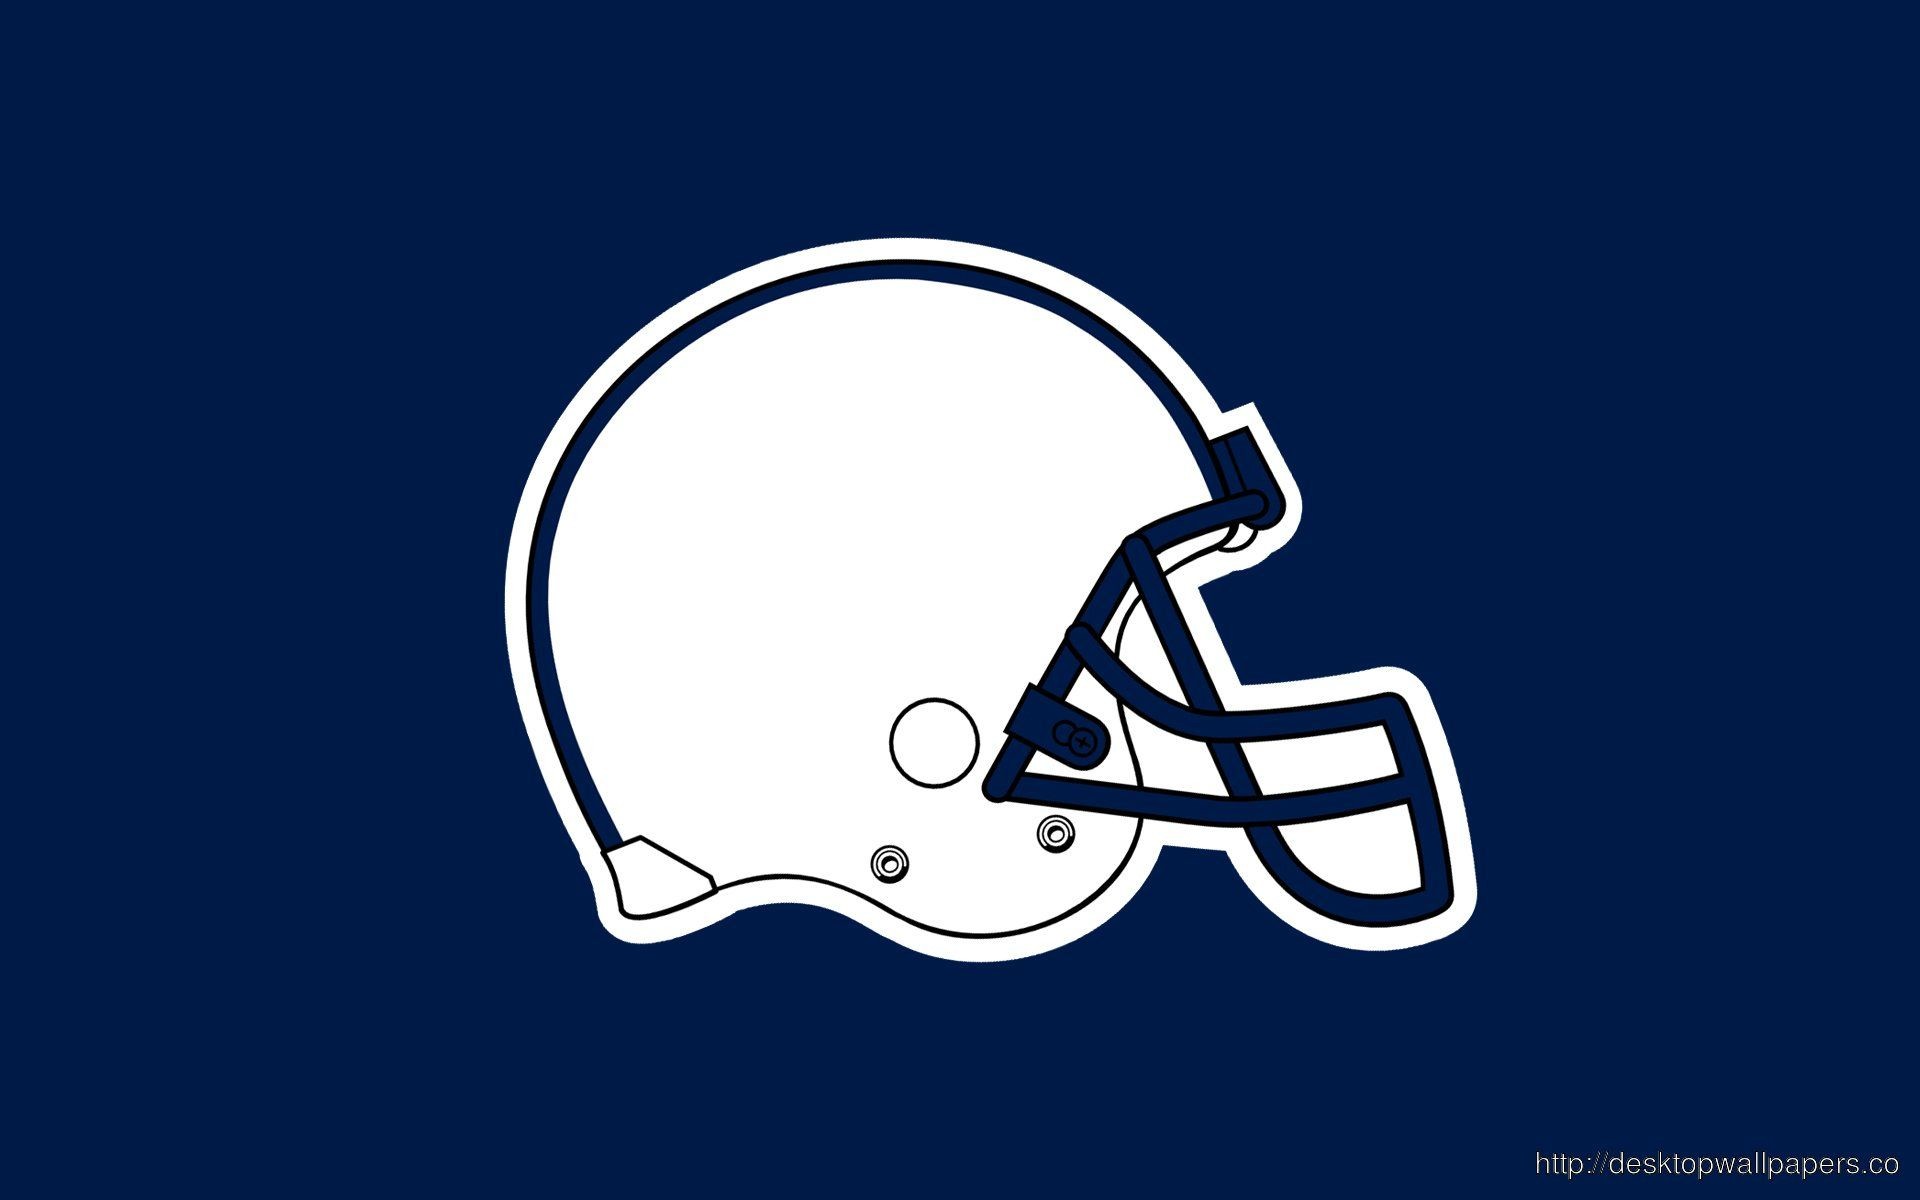 1920x1200 PENN STATE NITTANY LIONS college football wallpaper